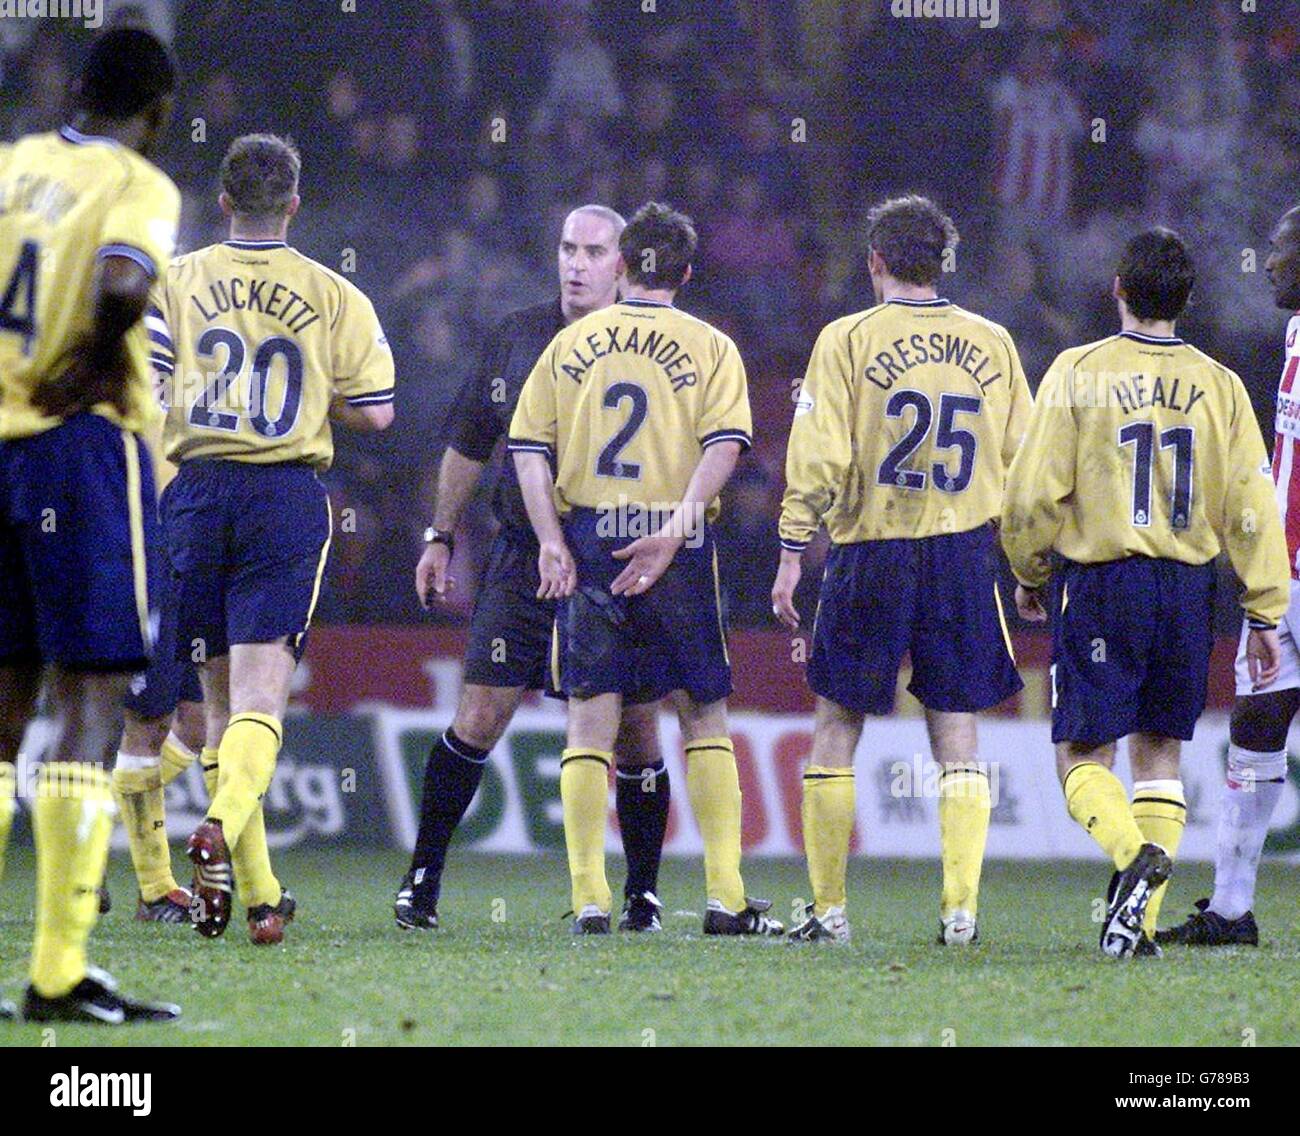 Preston players approach referee Frank Stretton after team mate Rankine is sent off against Sheffield United during their Nationwide Division One match at Sheffield's Bramall Lane ground. NO UNOFFICIAL CLUB WEBSITE USE. Stock Photo